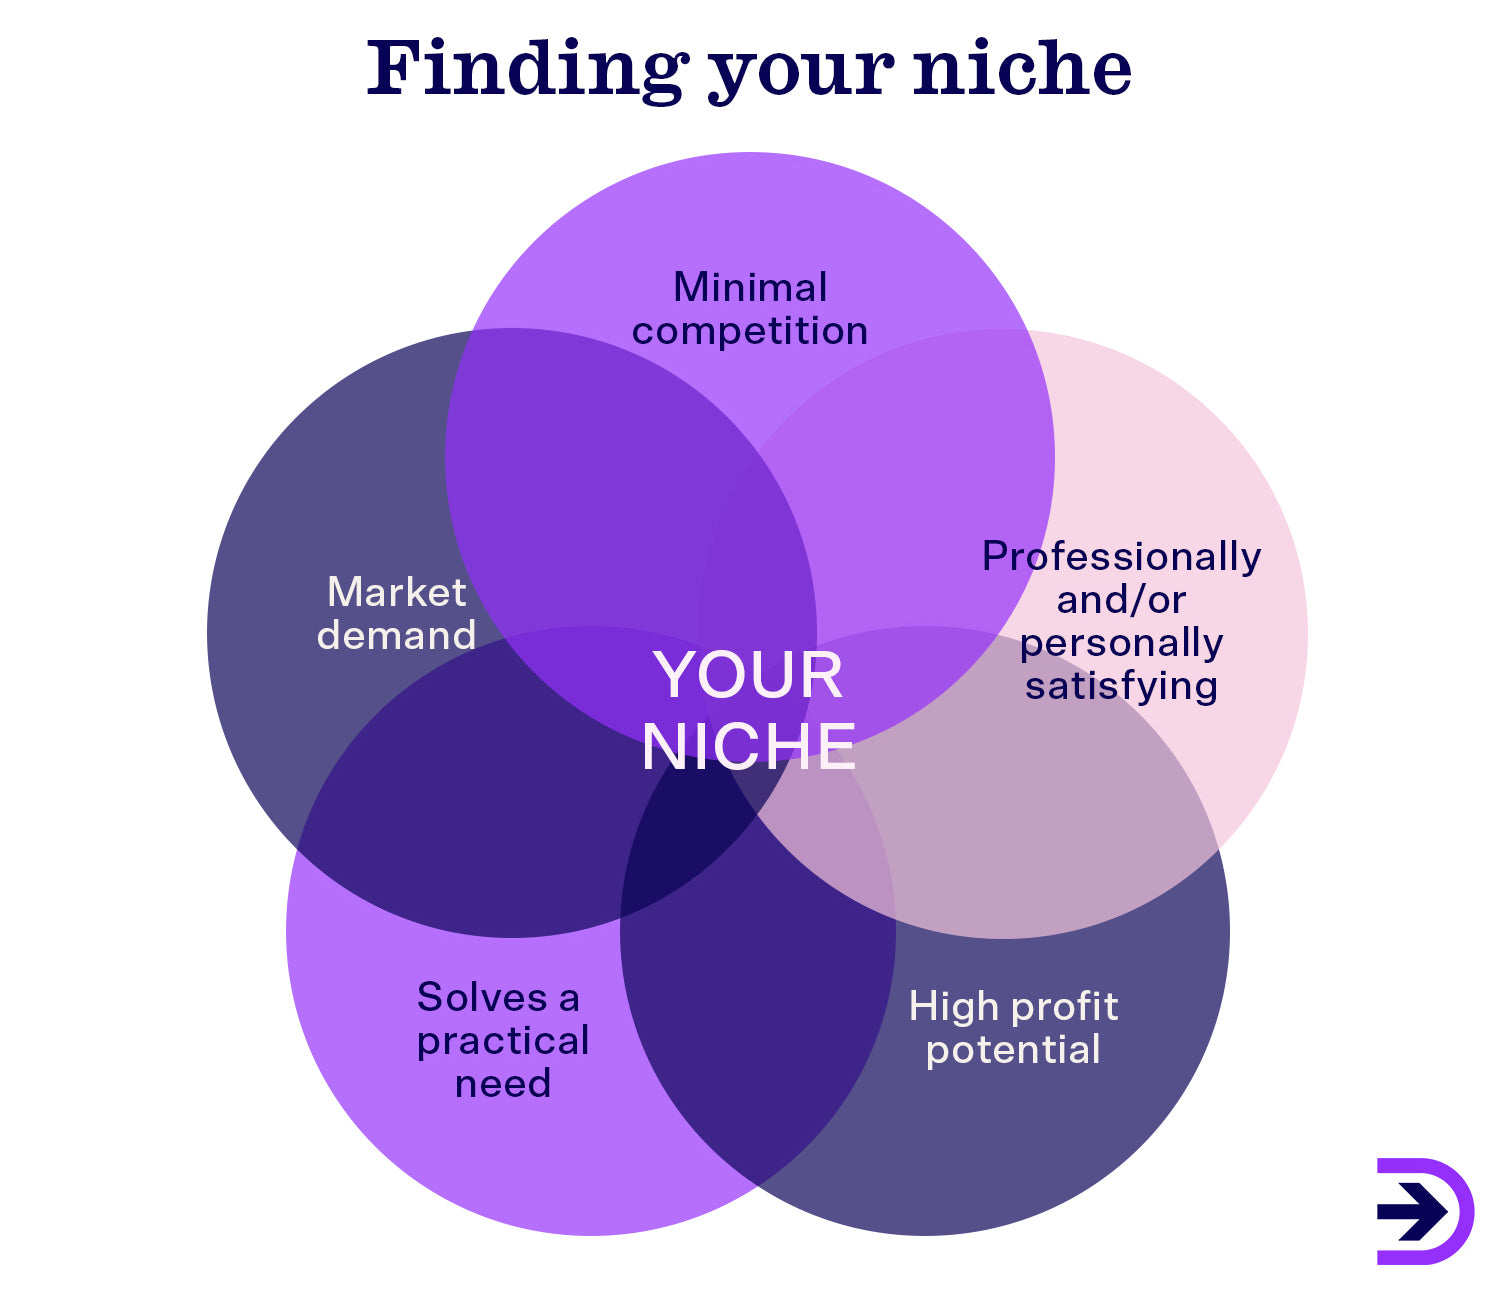 Find your niche by evaluating your target audience, where there is market demand, minimal competition and high profit potential.